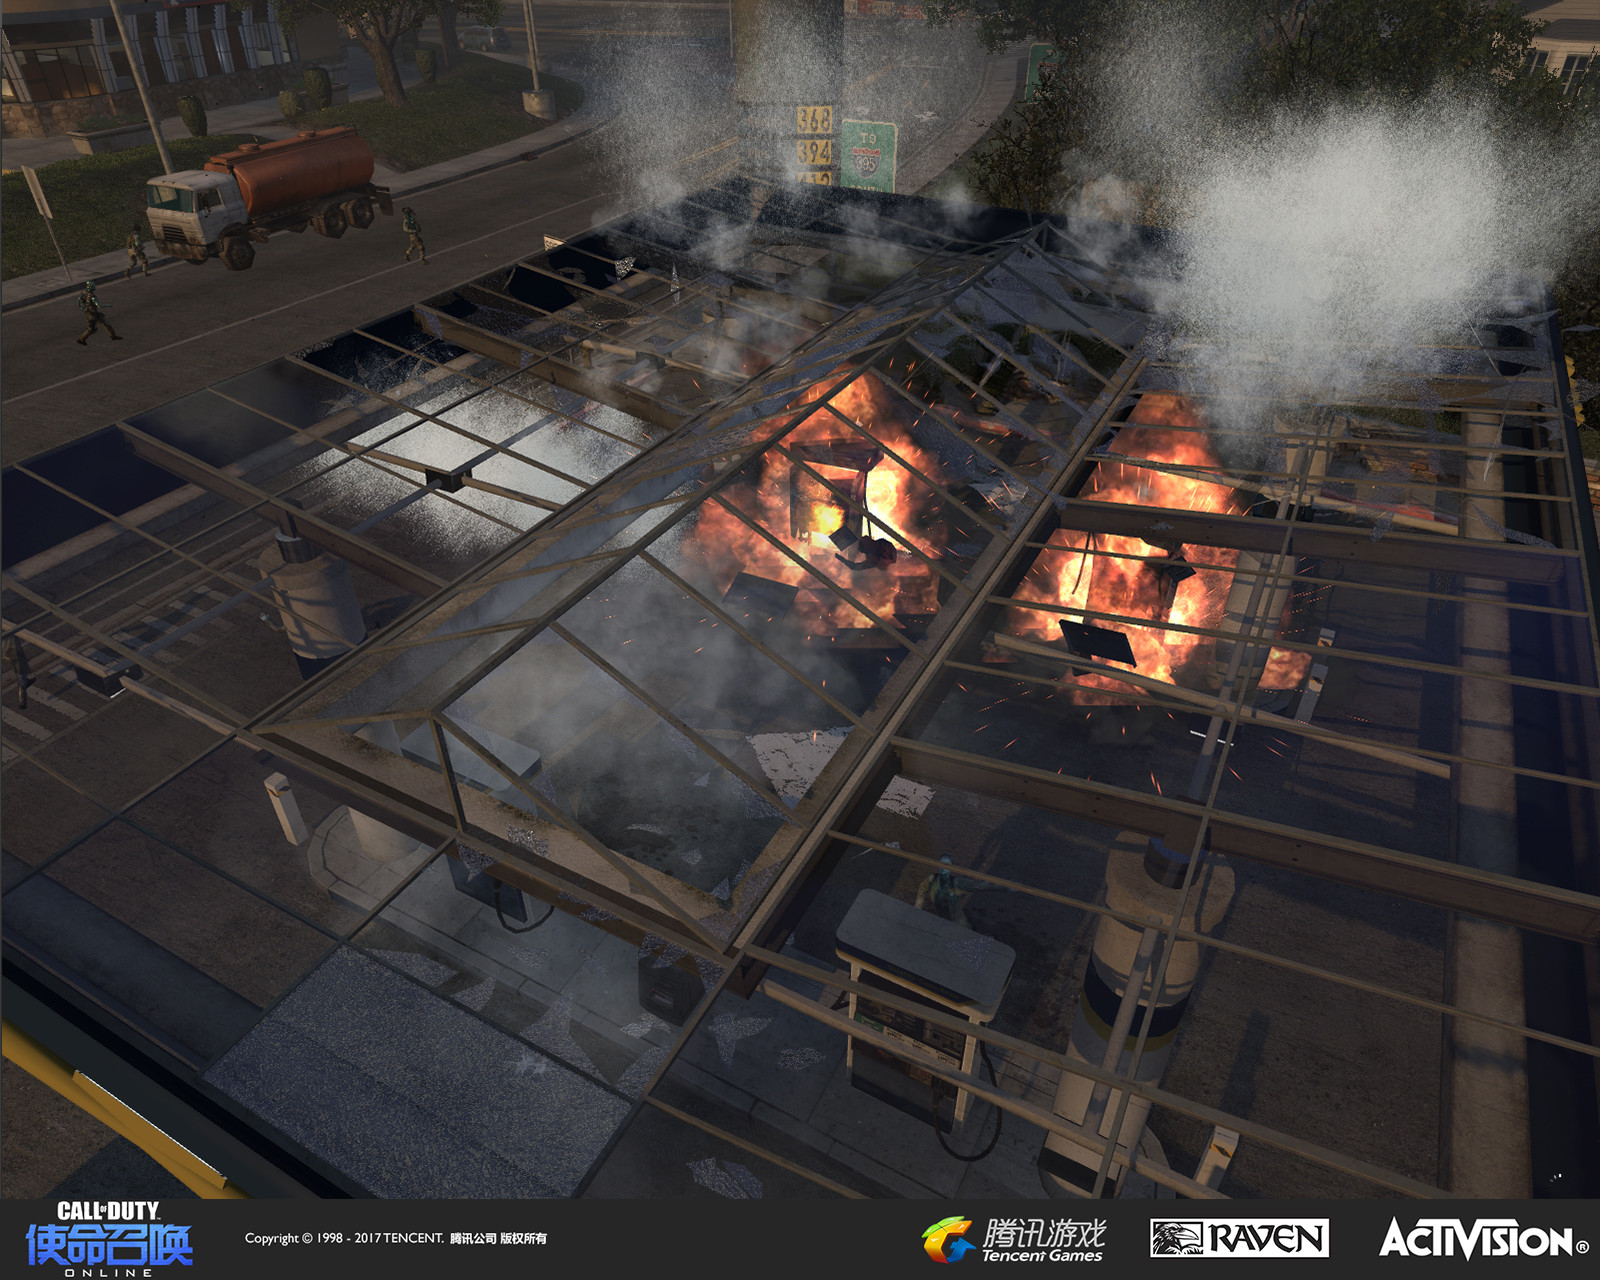 Gas station being destroyed from the player's vantage point in Chopper Gunship mode. I modified the old geo, rethemed it, and the effects were created by our designer and the effects team. 